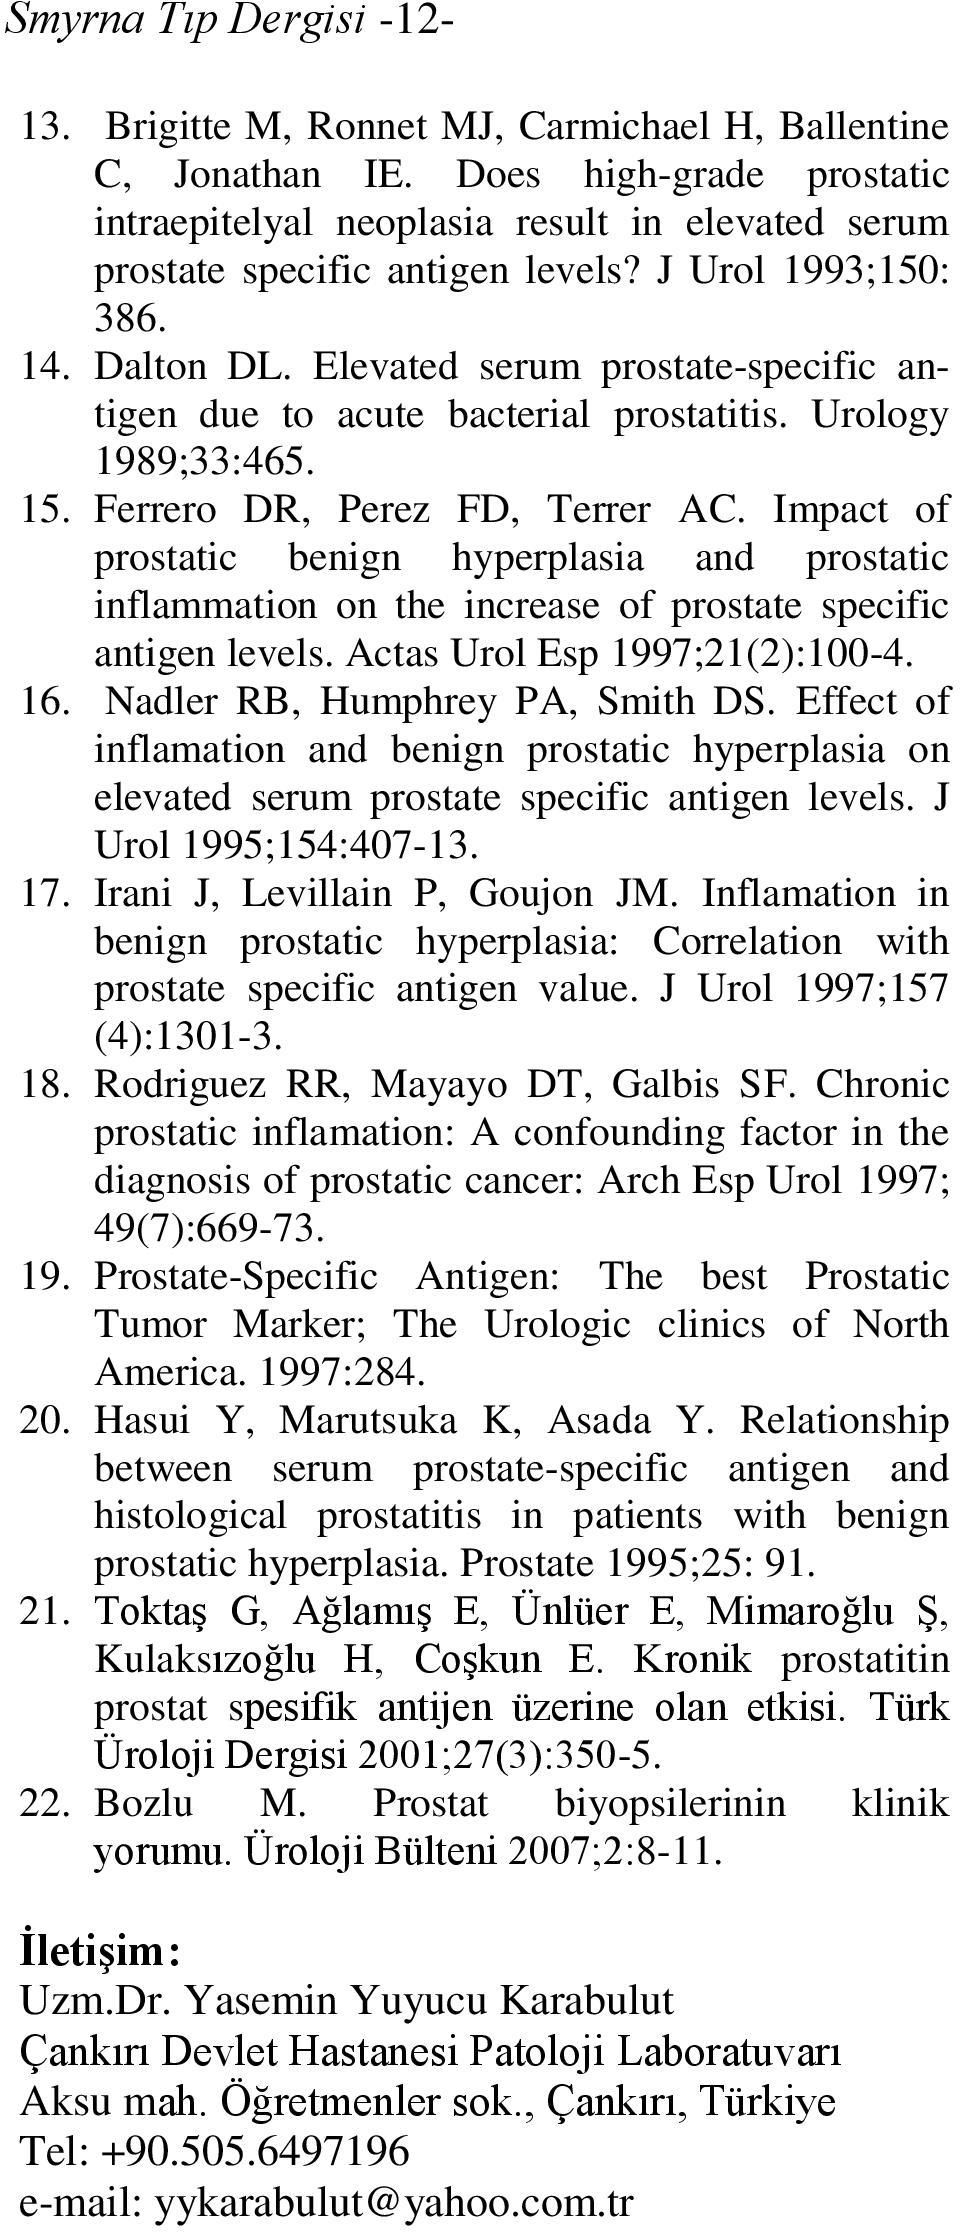 Impact of prostatic benign hyperplasia and prostatic inflammation on the increase of prostate specific antigen levels. Actas Urol Esp 1997;21(2):100-4. 16. Nadler RB, Humphrey PA, Smith DS.